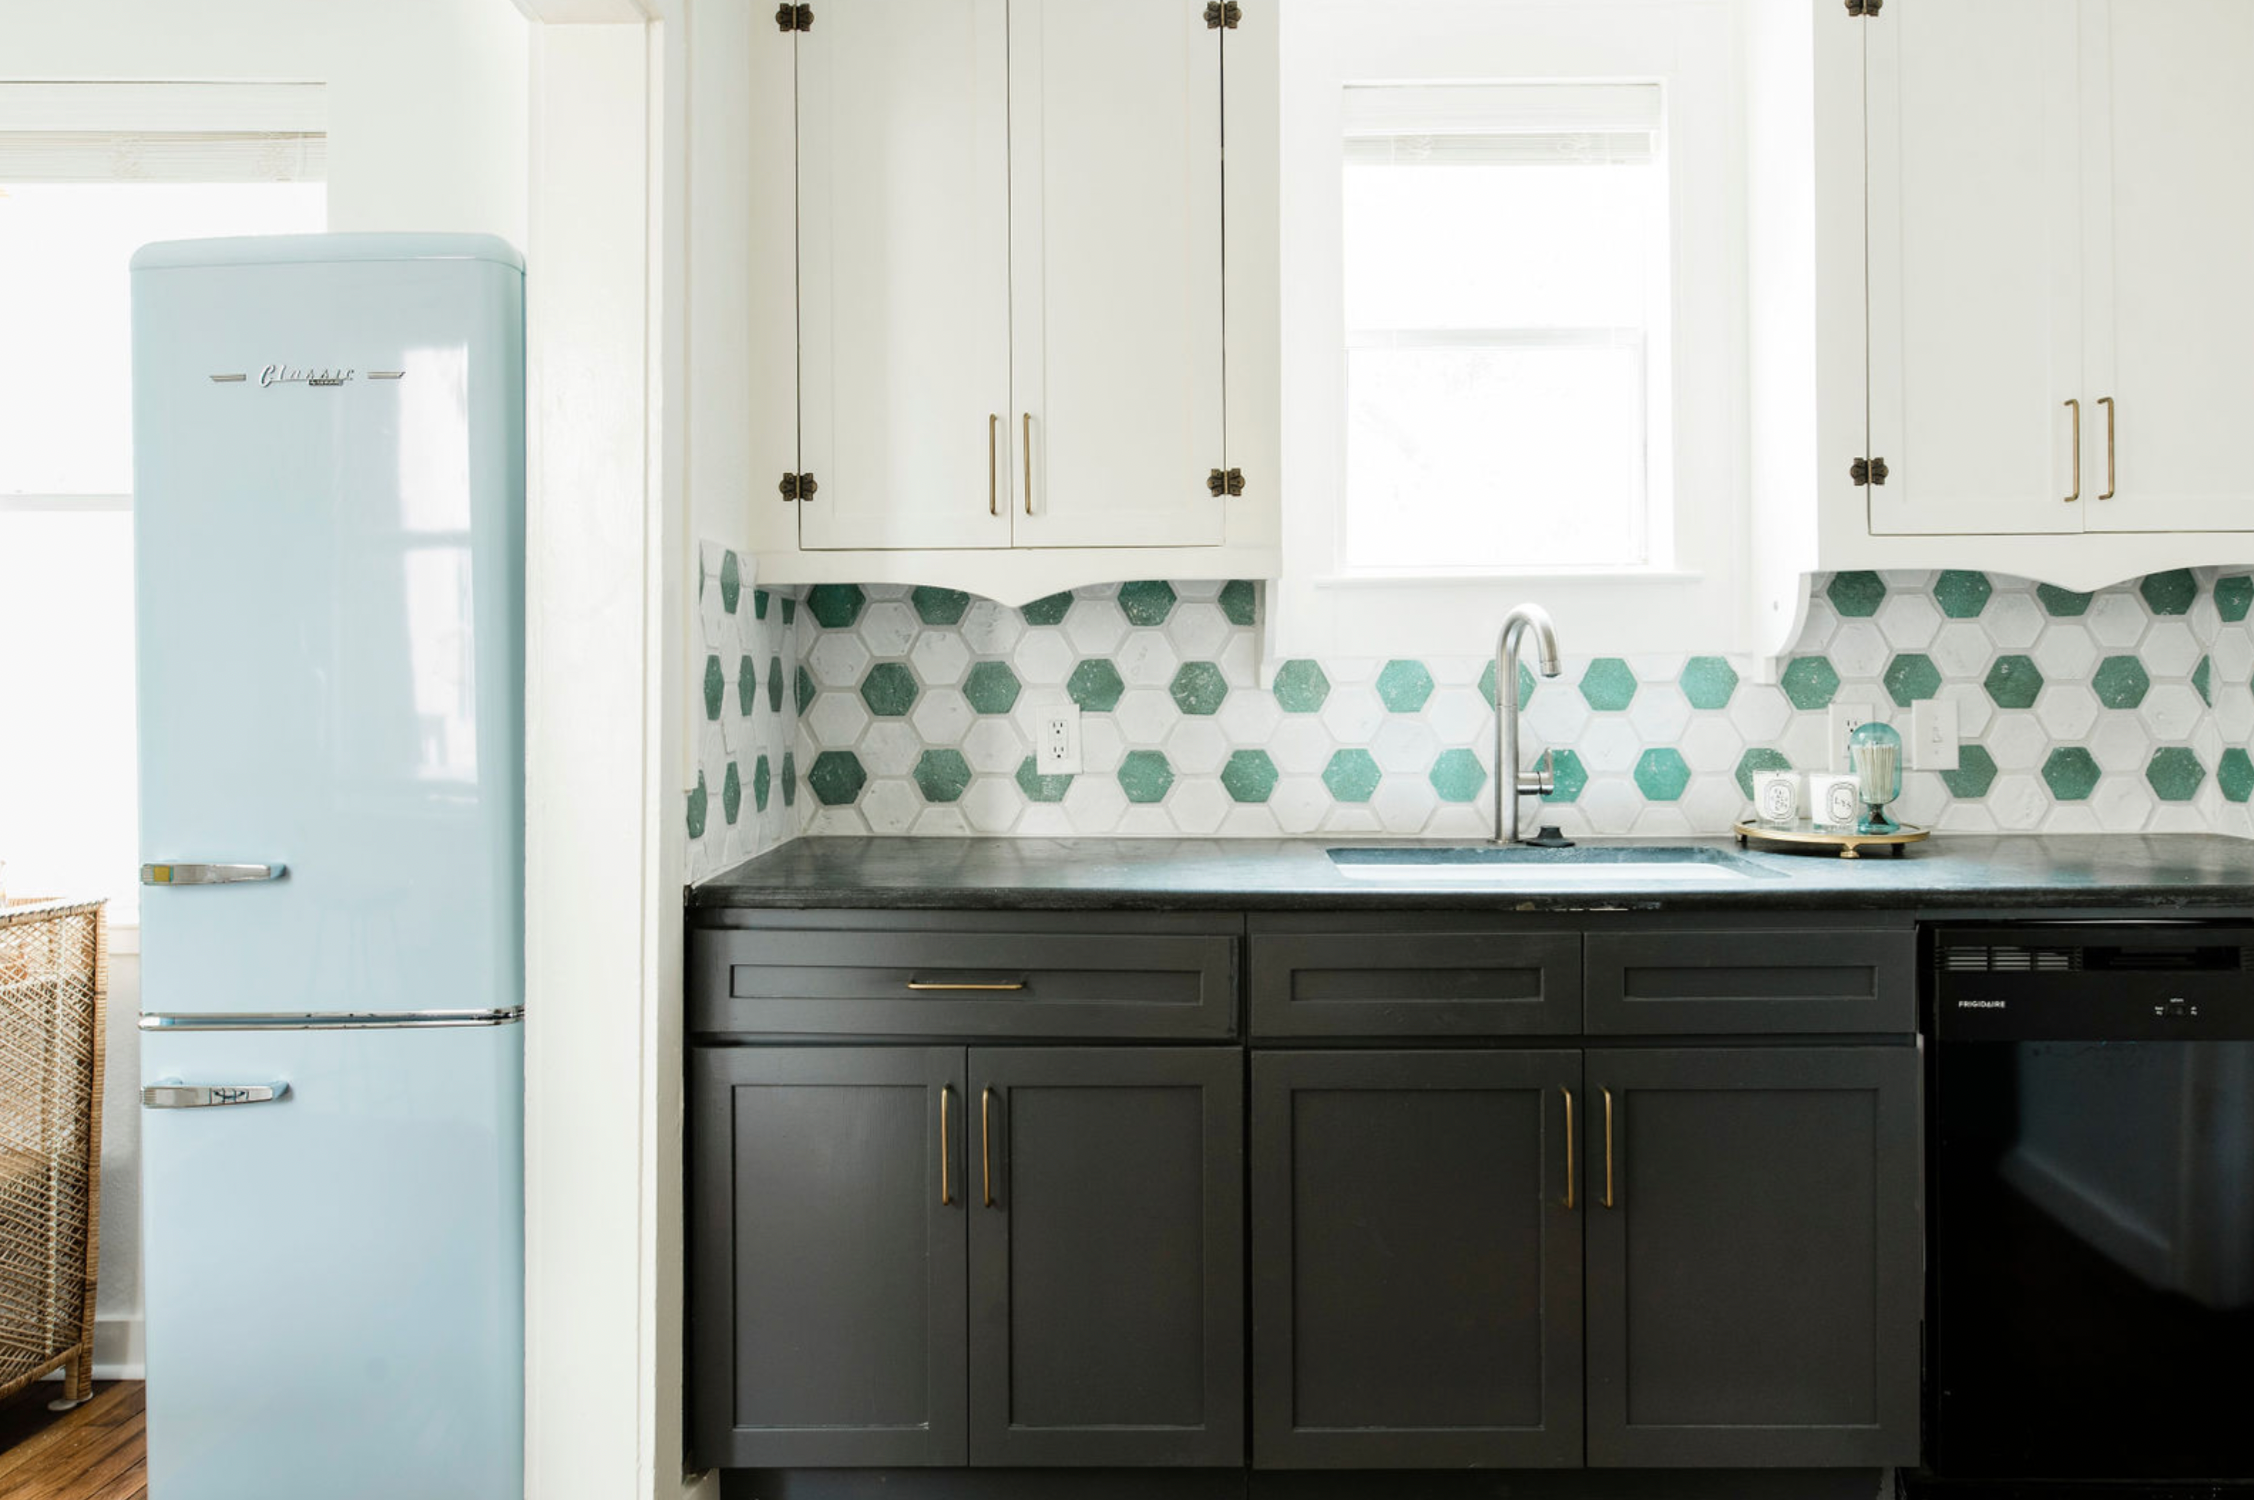 Kitchen with blue fridge, white cabinets and white and green backsplash tile clay imports